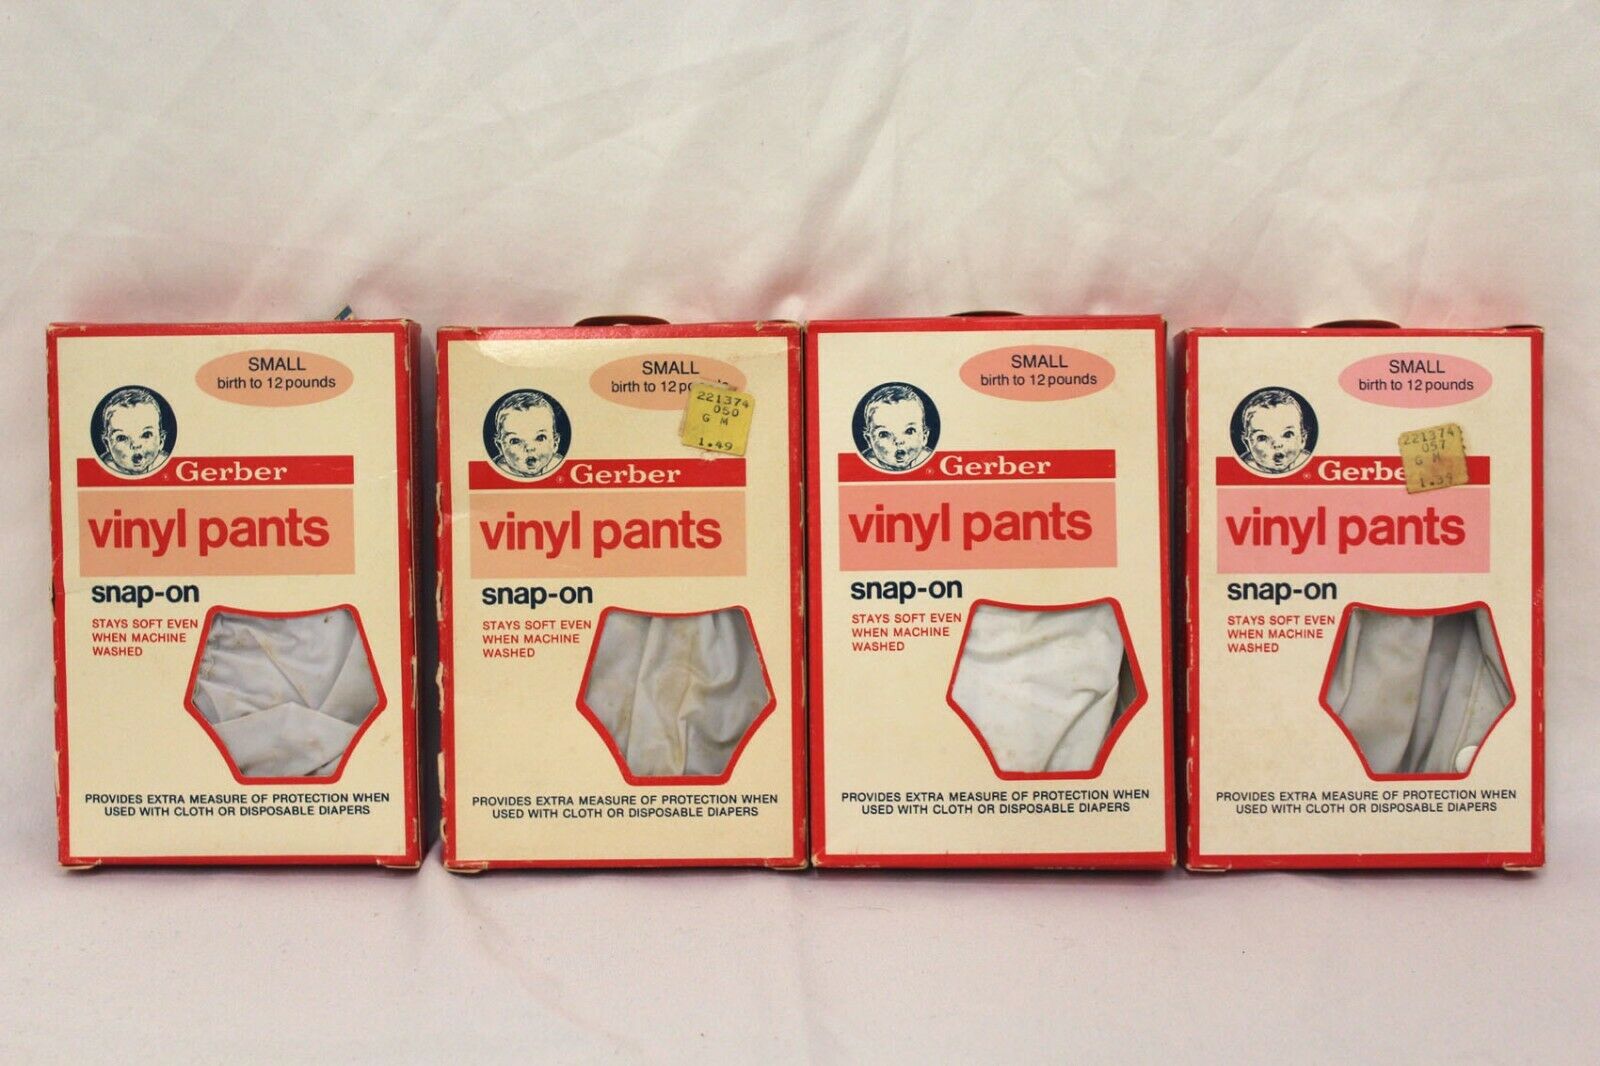 4 Boxes Vtg Gerber Vinyl Pants Size Small Snap On  Birth To 12 Lbs Pull-ups 2